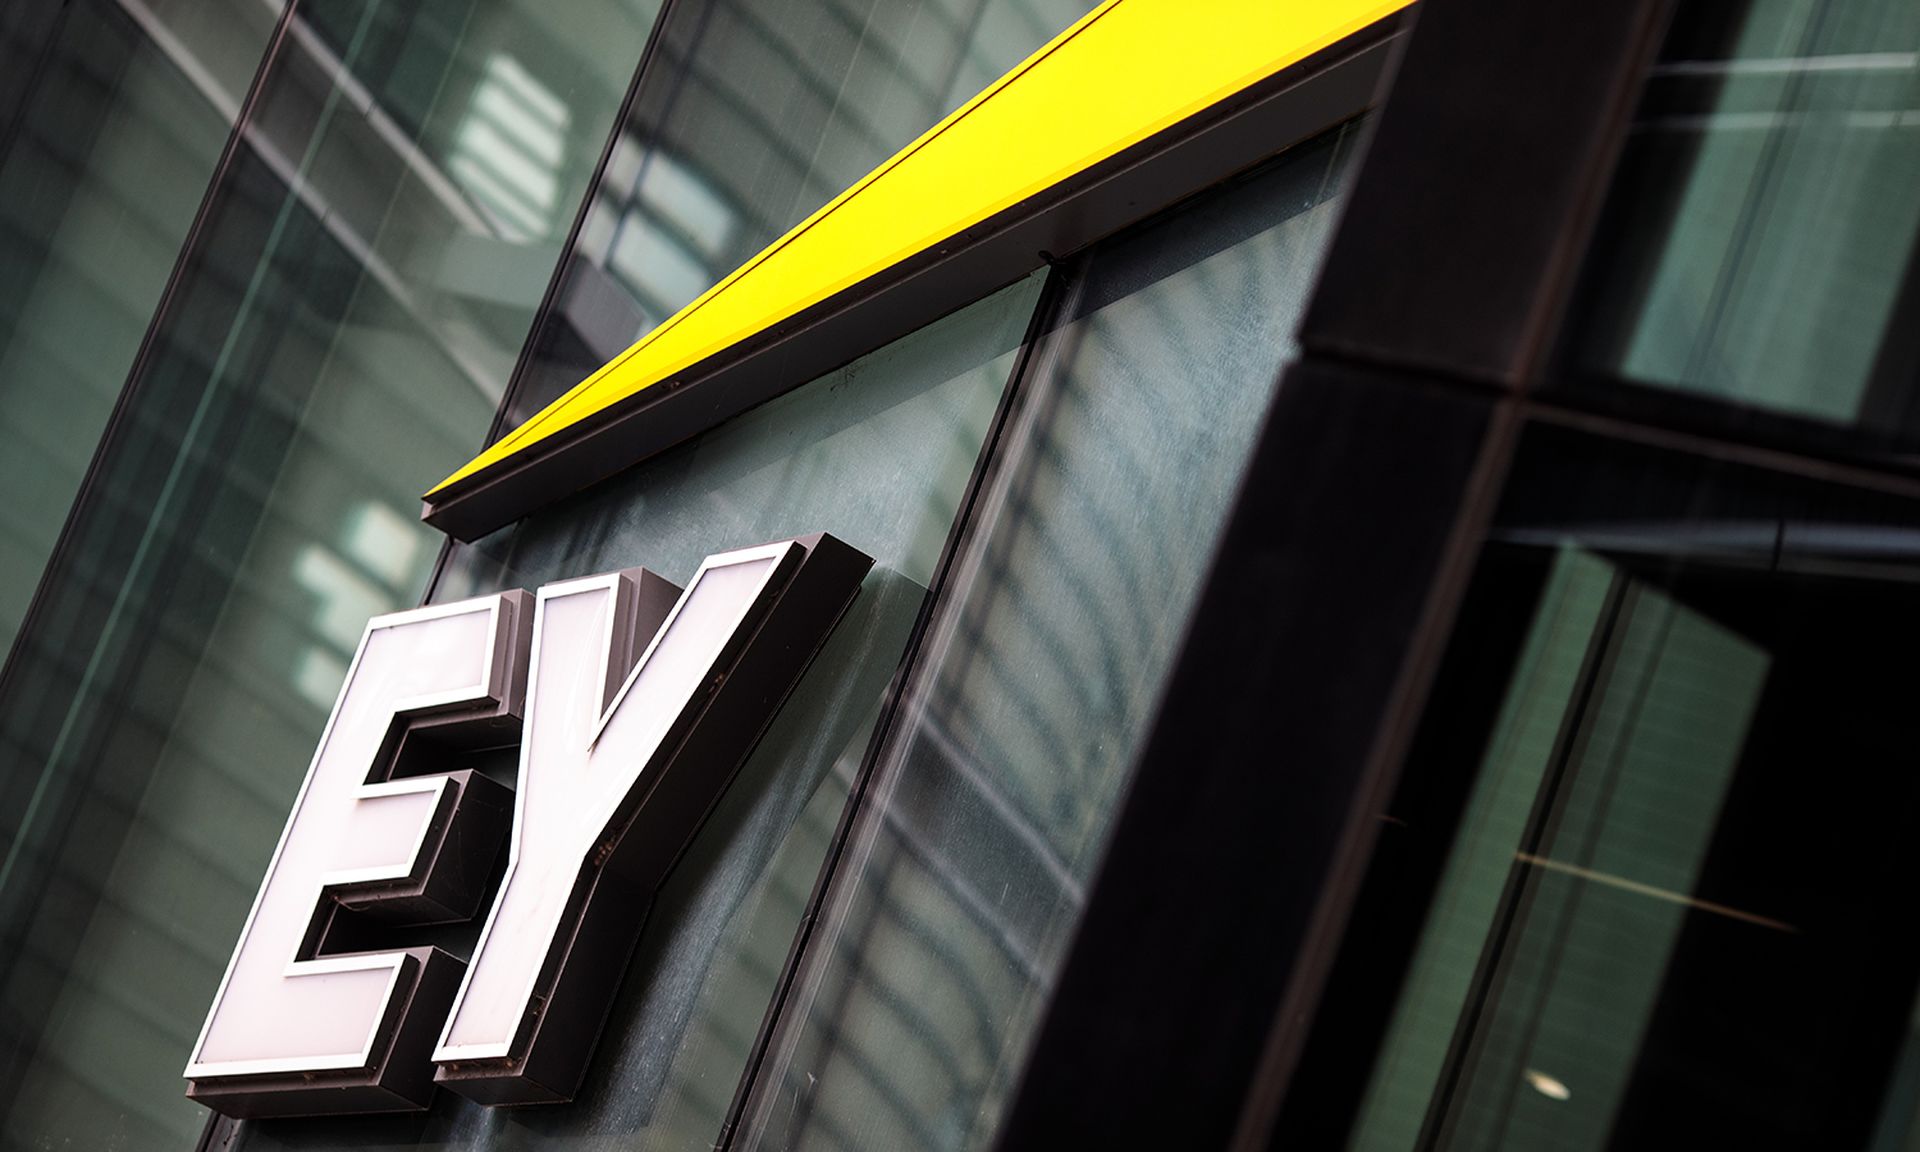 The Ernst & Young (EY) sign